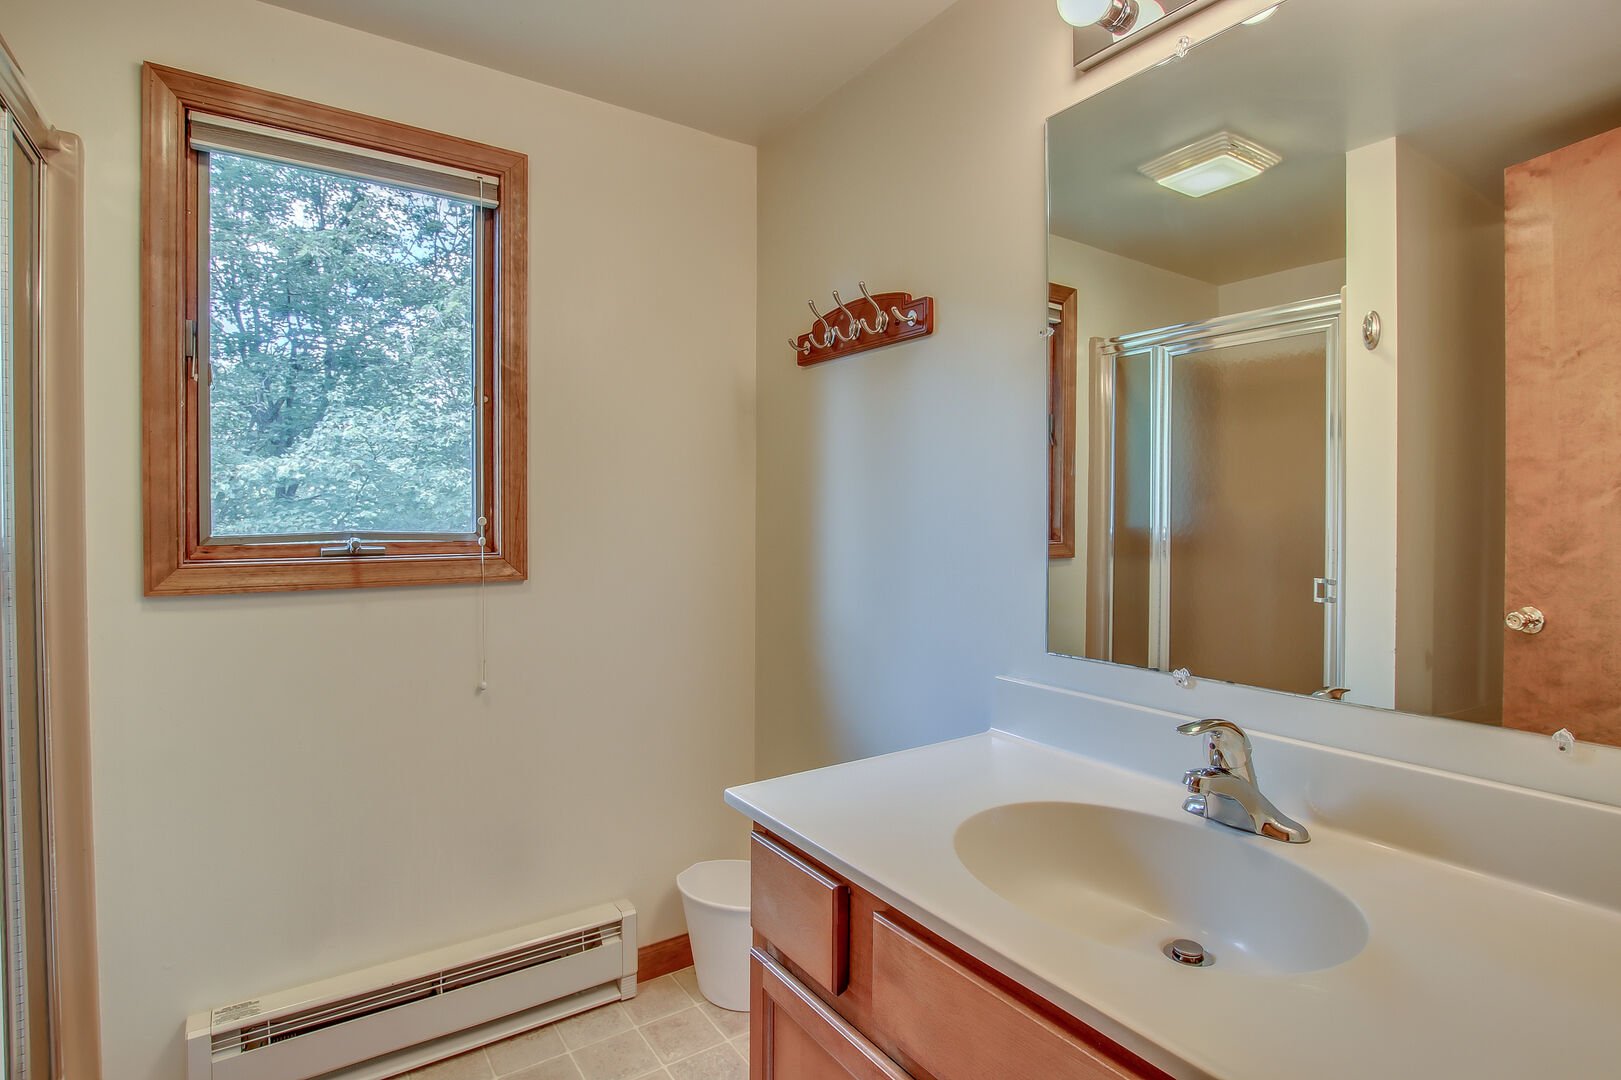 The sink and mirror in the bathroom of this Pocono rental in Towamensing Trails.